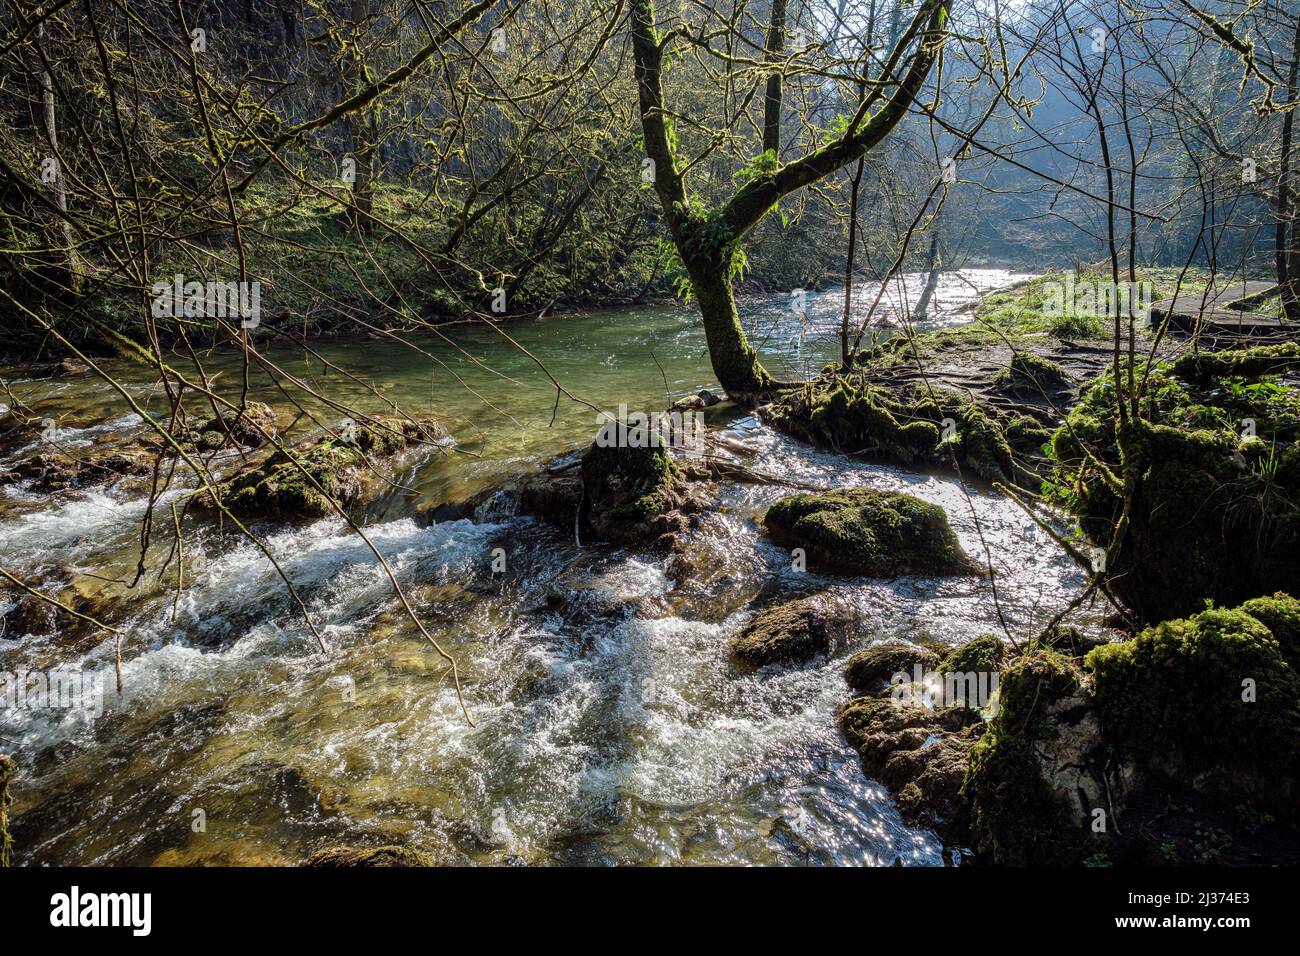 The River Wye in Chee Dale, Peak District National Park, Derbyshire, England Stockfoto